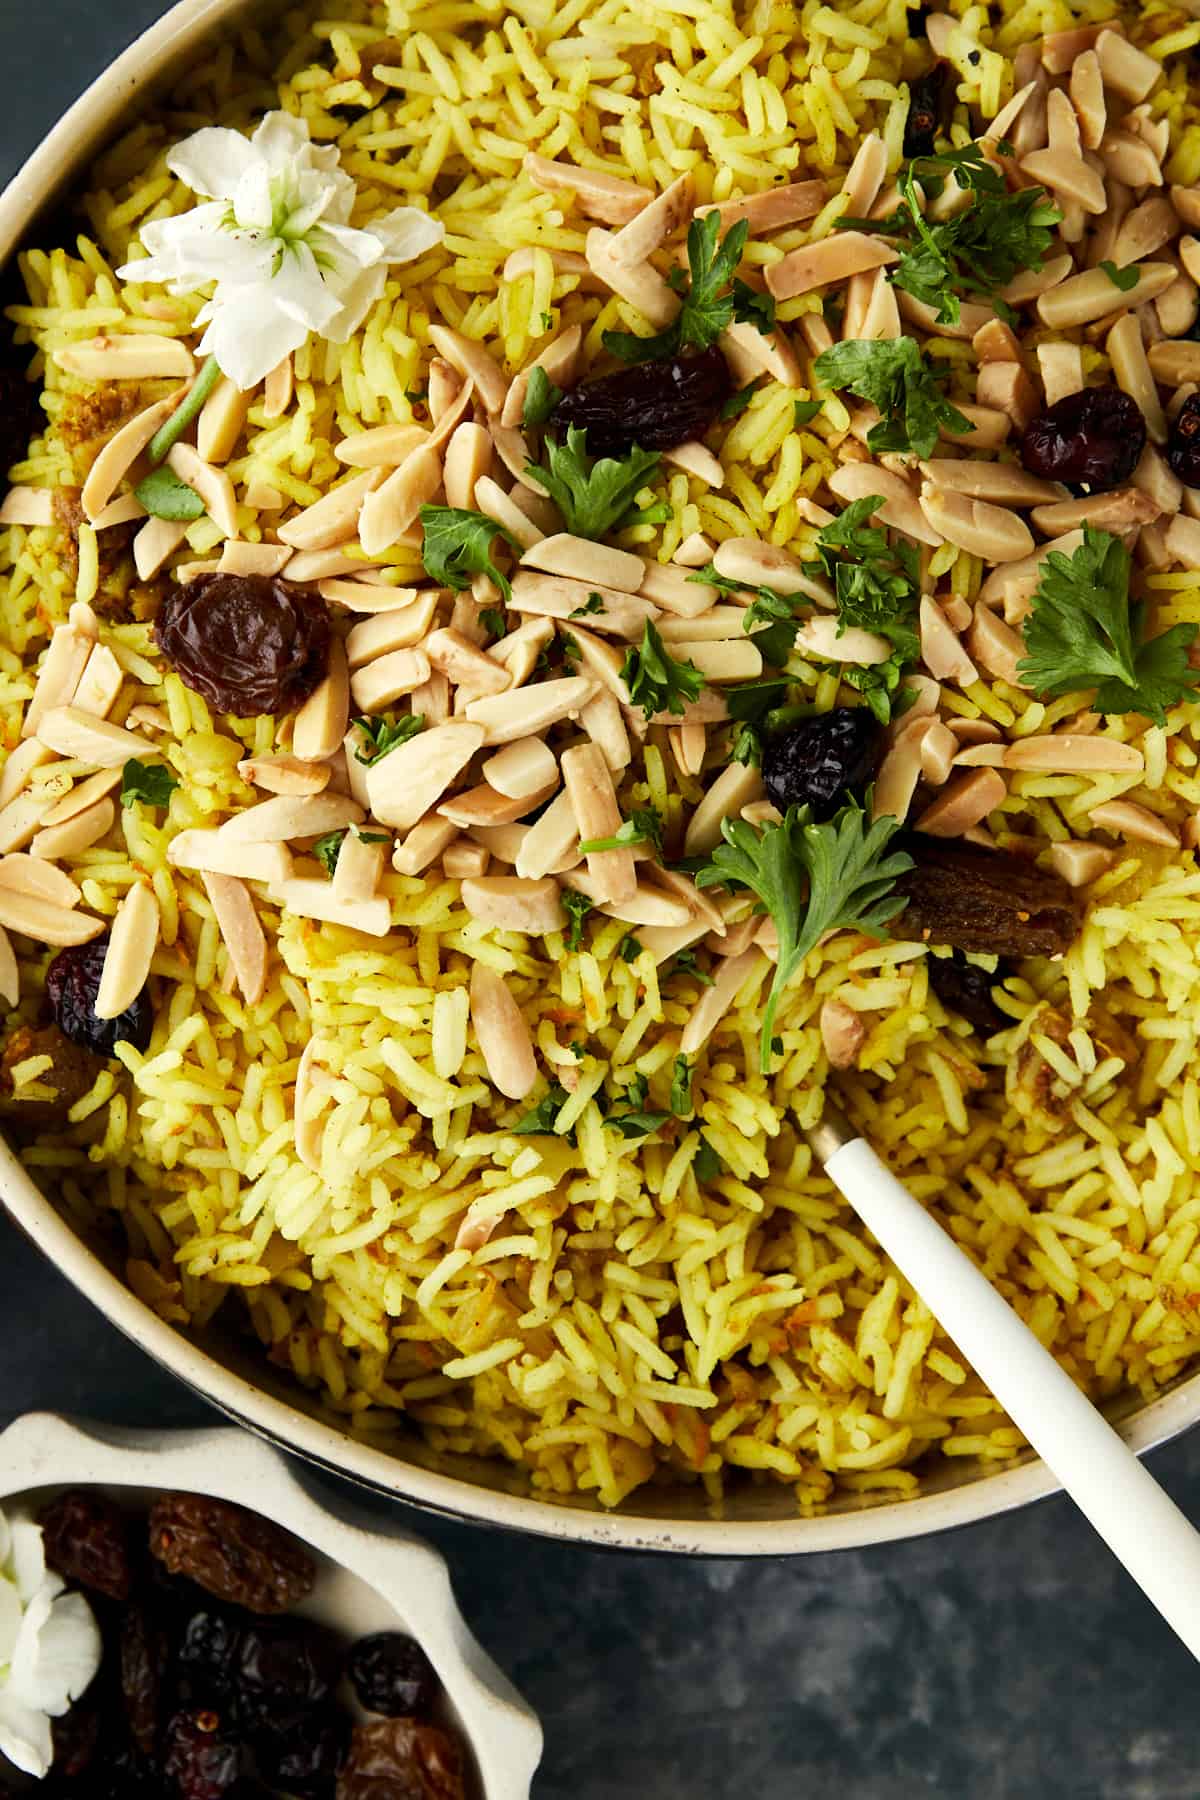 close up image of Persian jeweled rice topped with dried fruit, nuts, and herbs